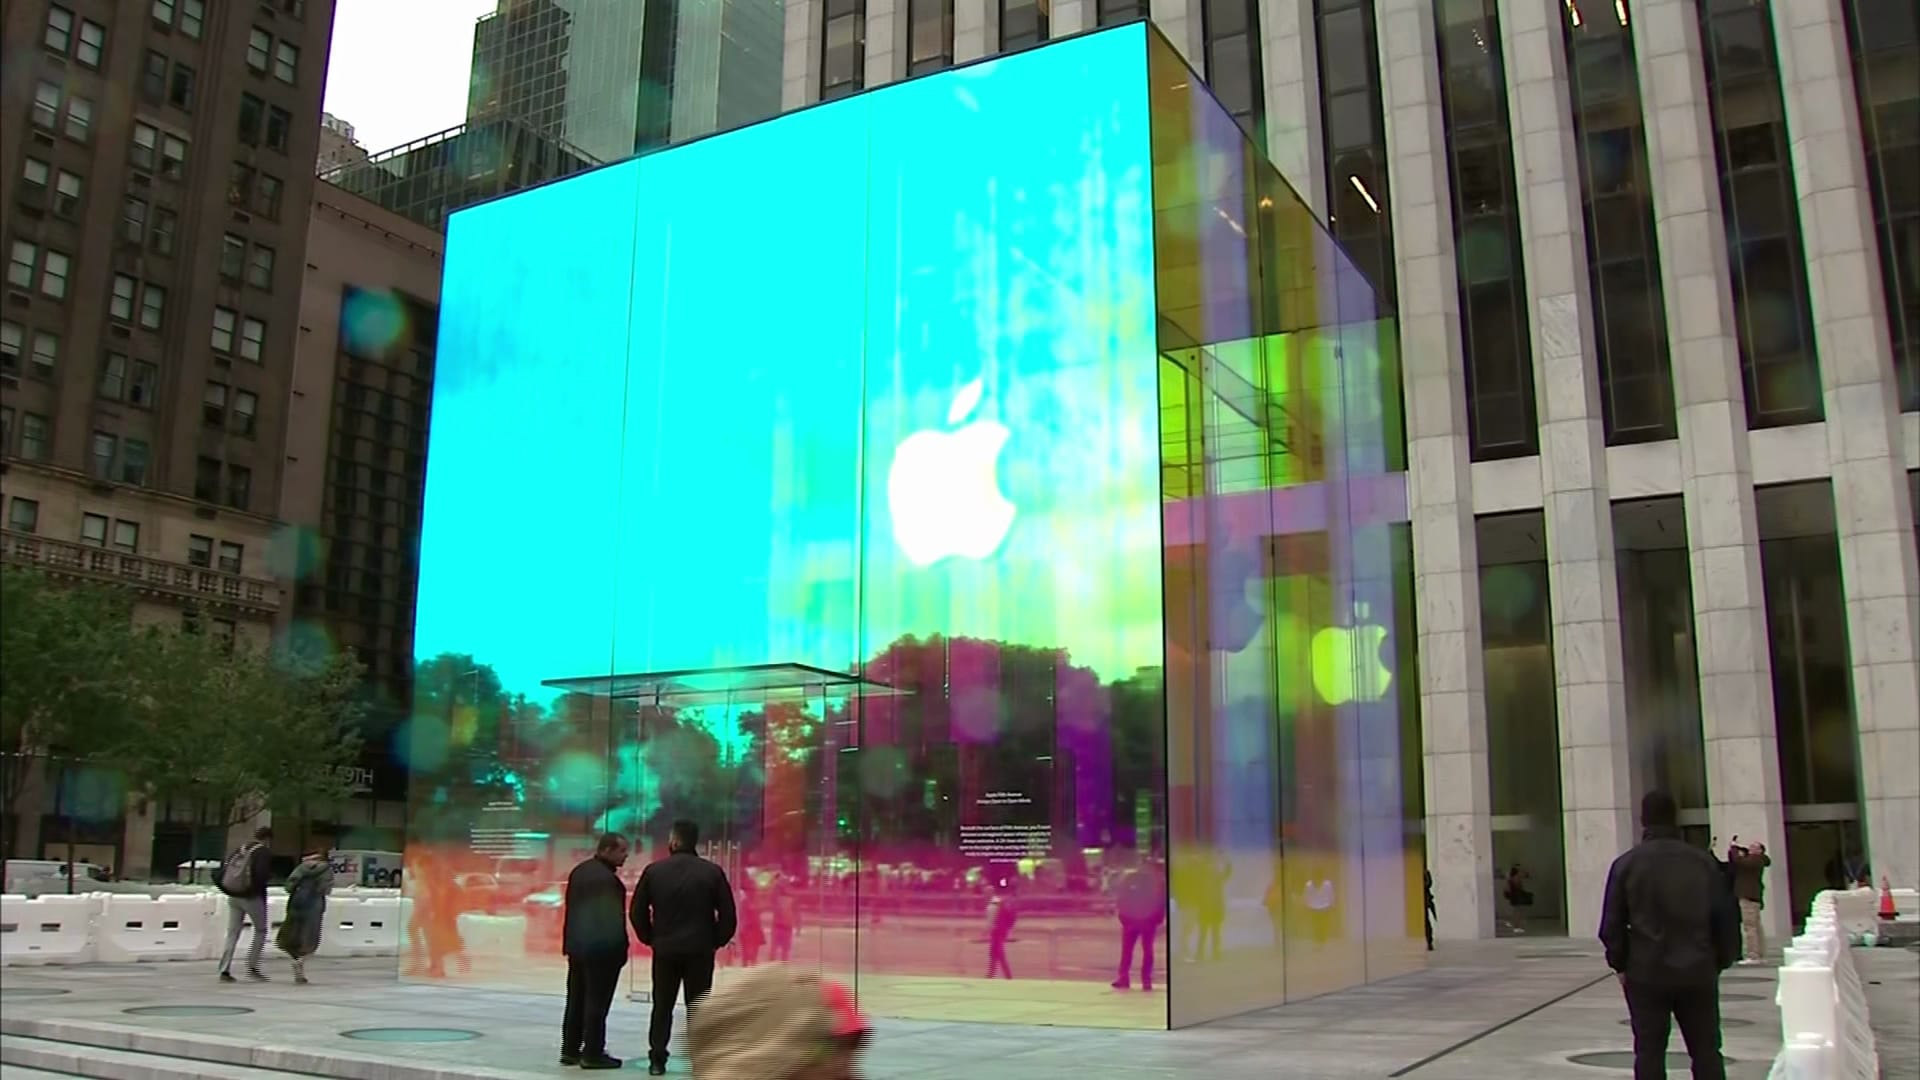 Apple New York flagship store renovated as rainbow cube